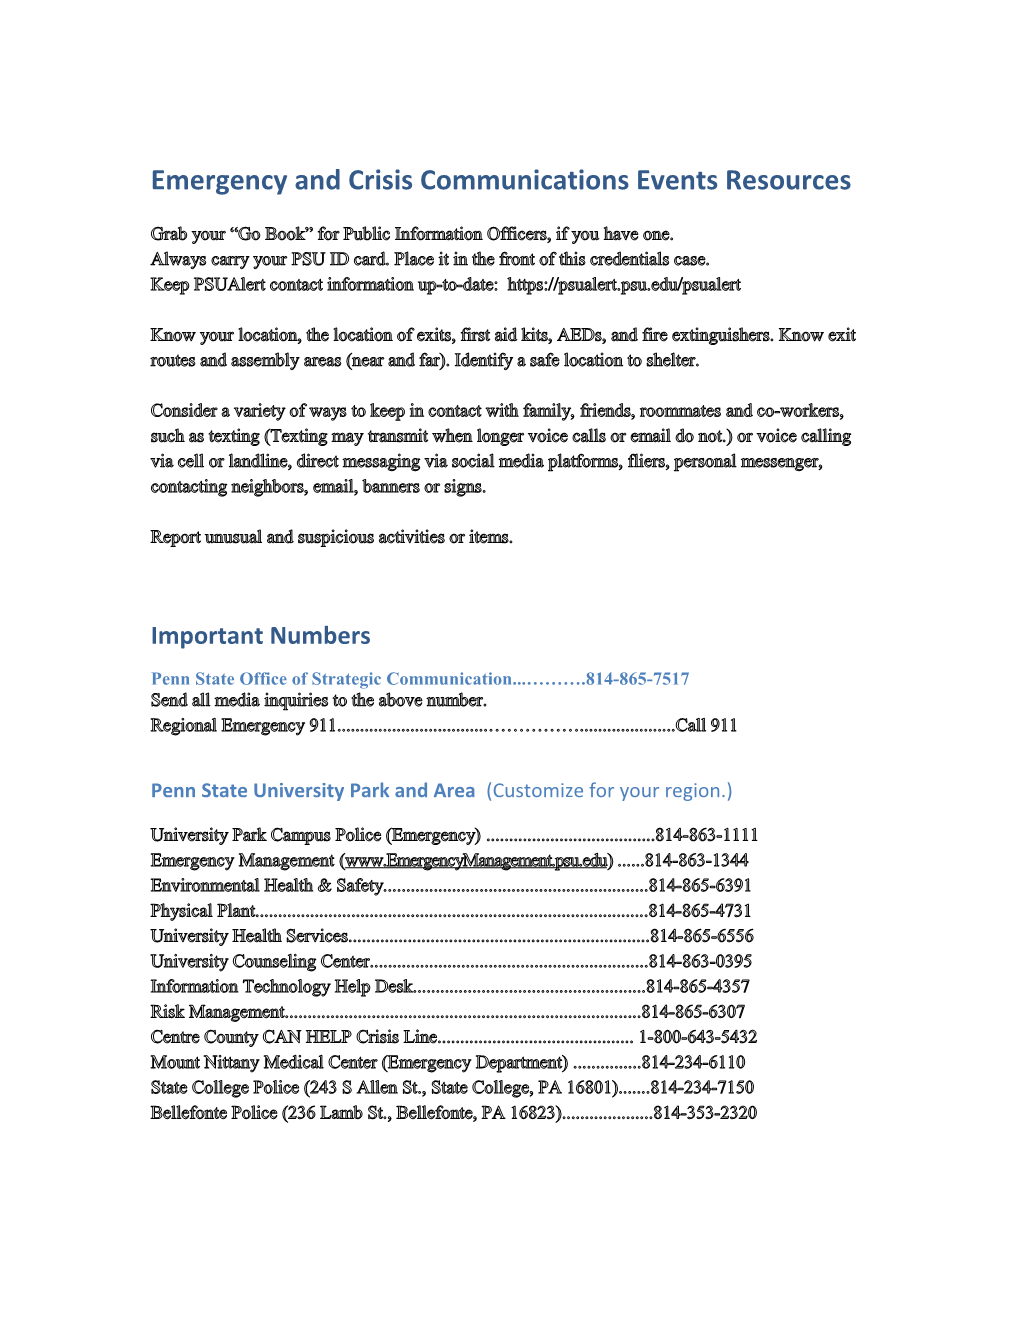 Emergency and Crisis Communications Eventsresources